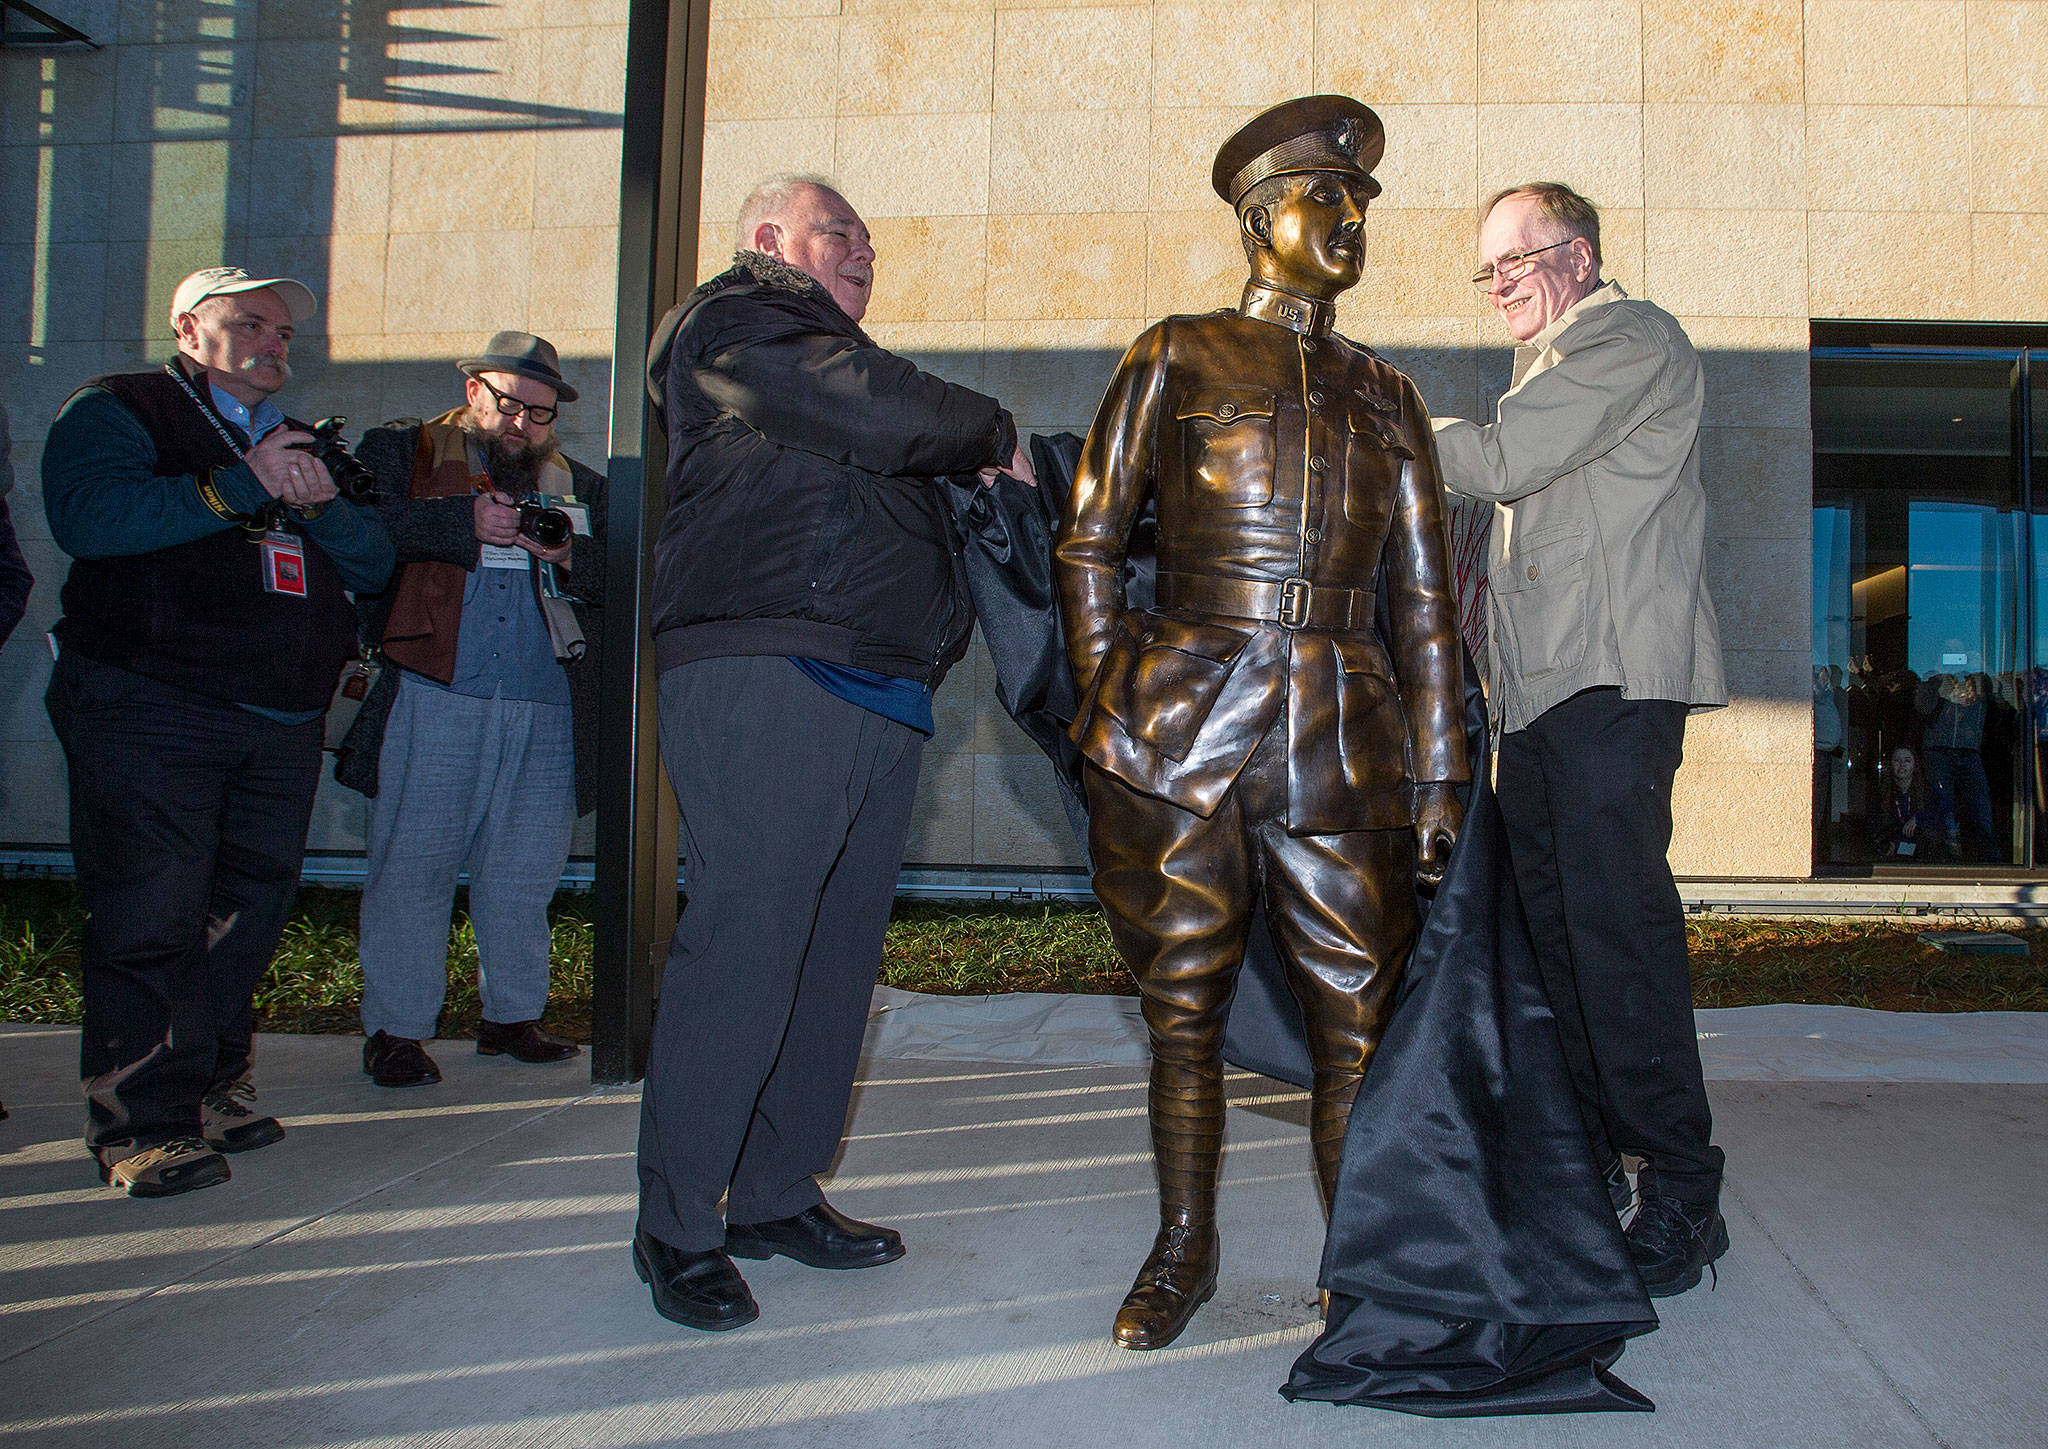 Two of Lt. Topliff Paine’s relatives, Nicholas Moe and Tom Paine, reveal a life-sized statue of the man on opening day, March 4, of the Paine Field Terminal in Everett. (Andy Bronson / The Herald)